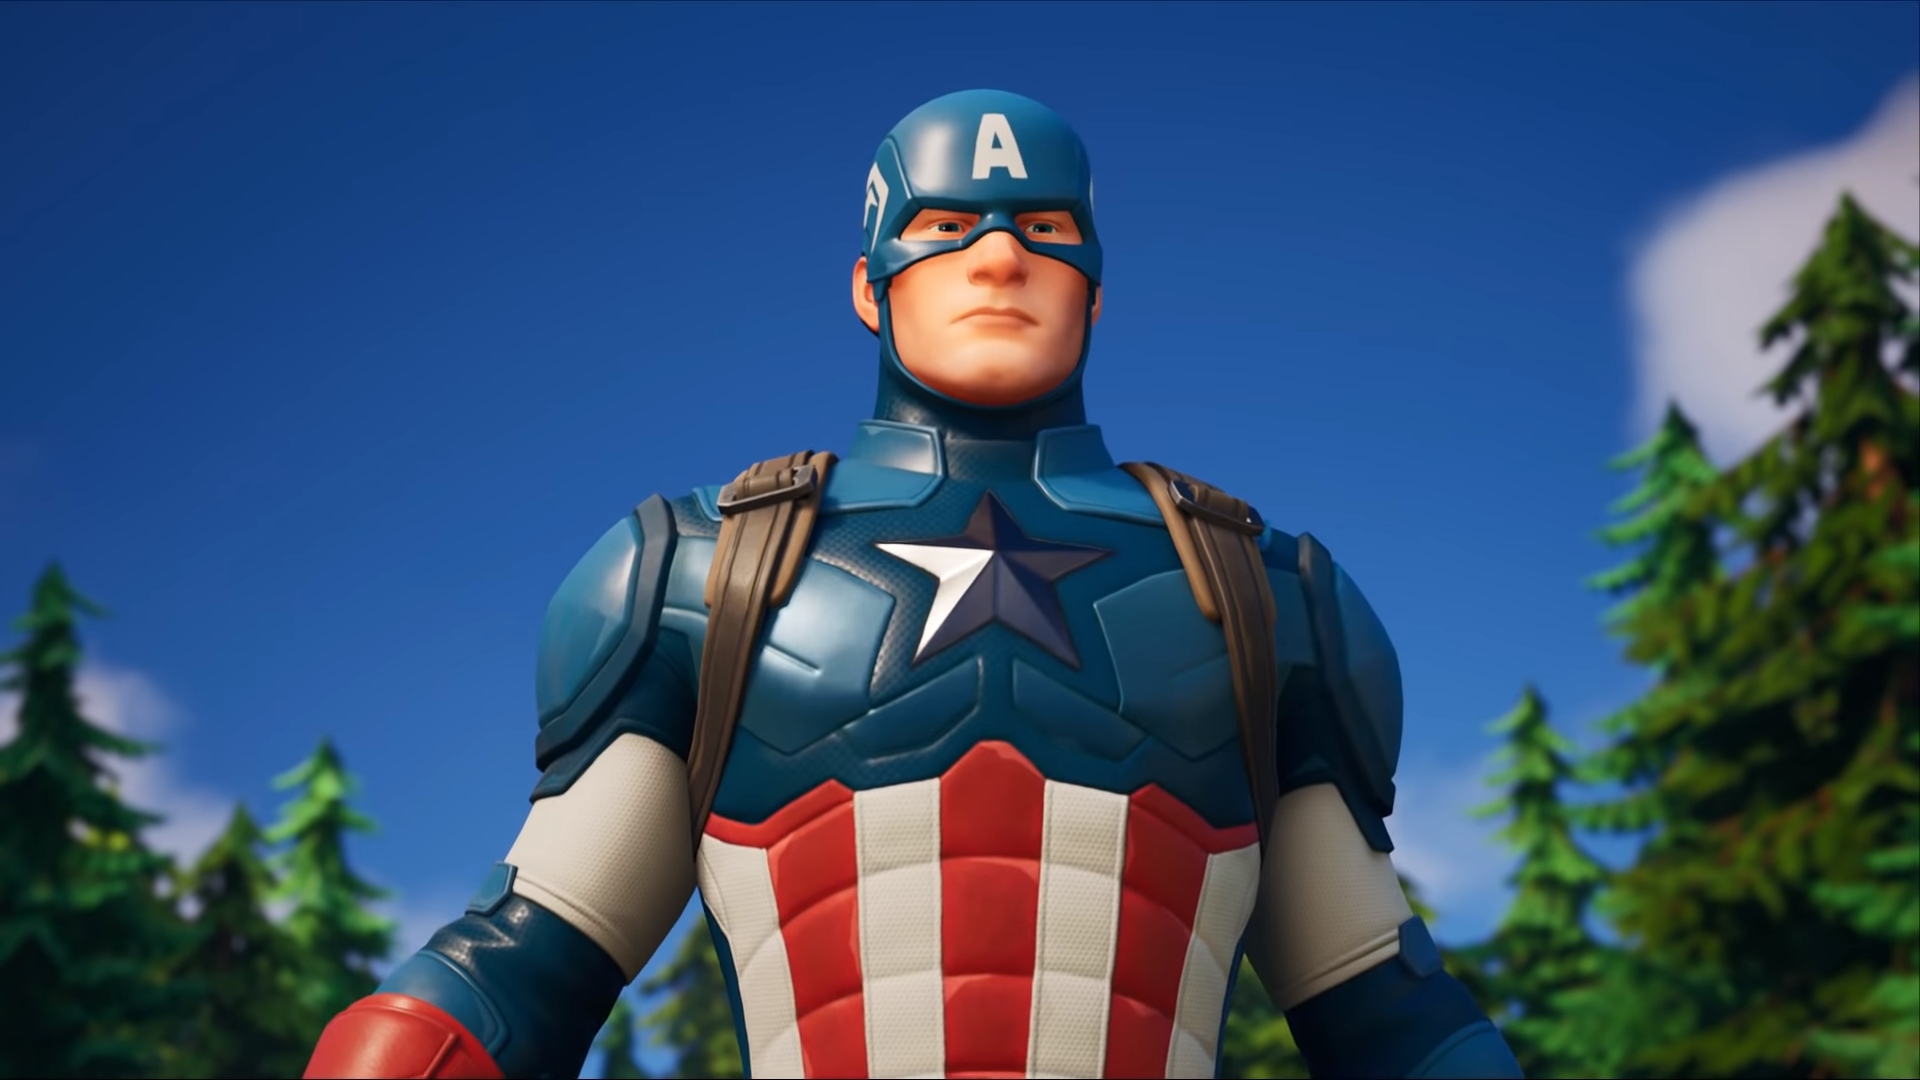 Captain America Skin Now Available In Fortnite Item Shop Dot Esports